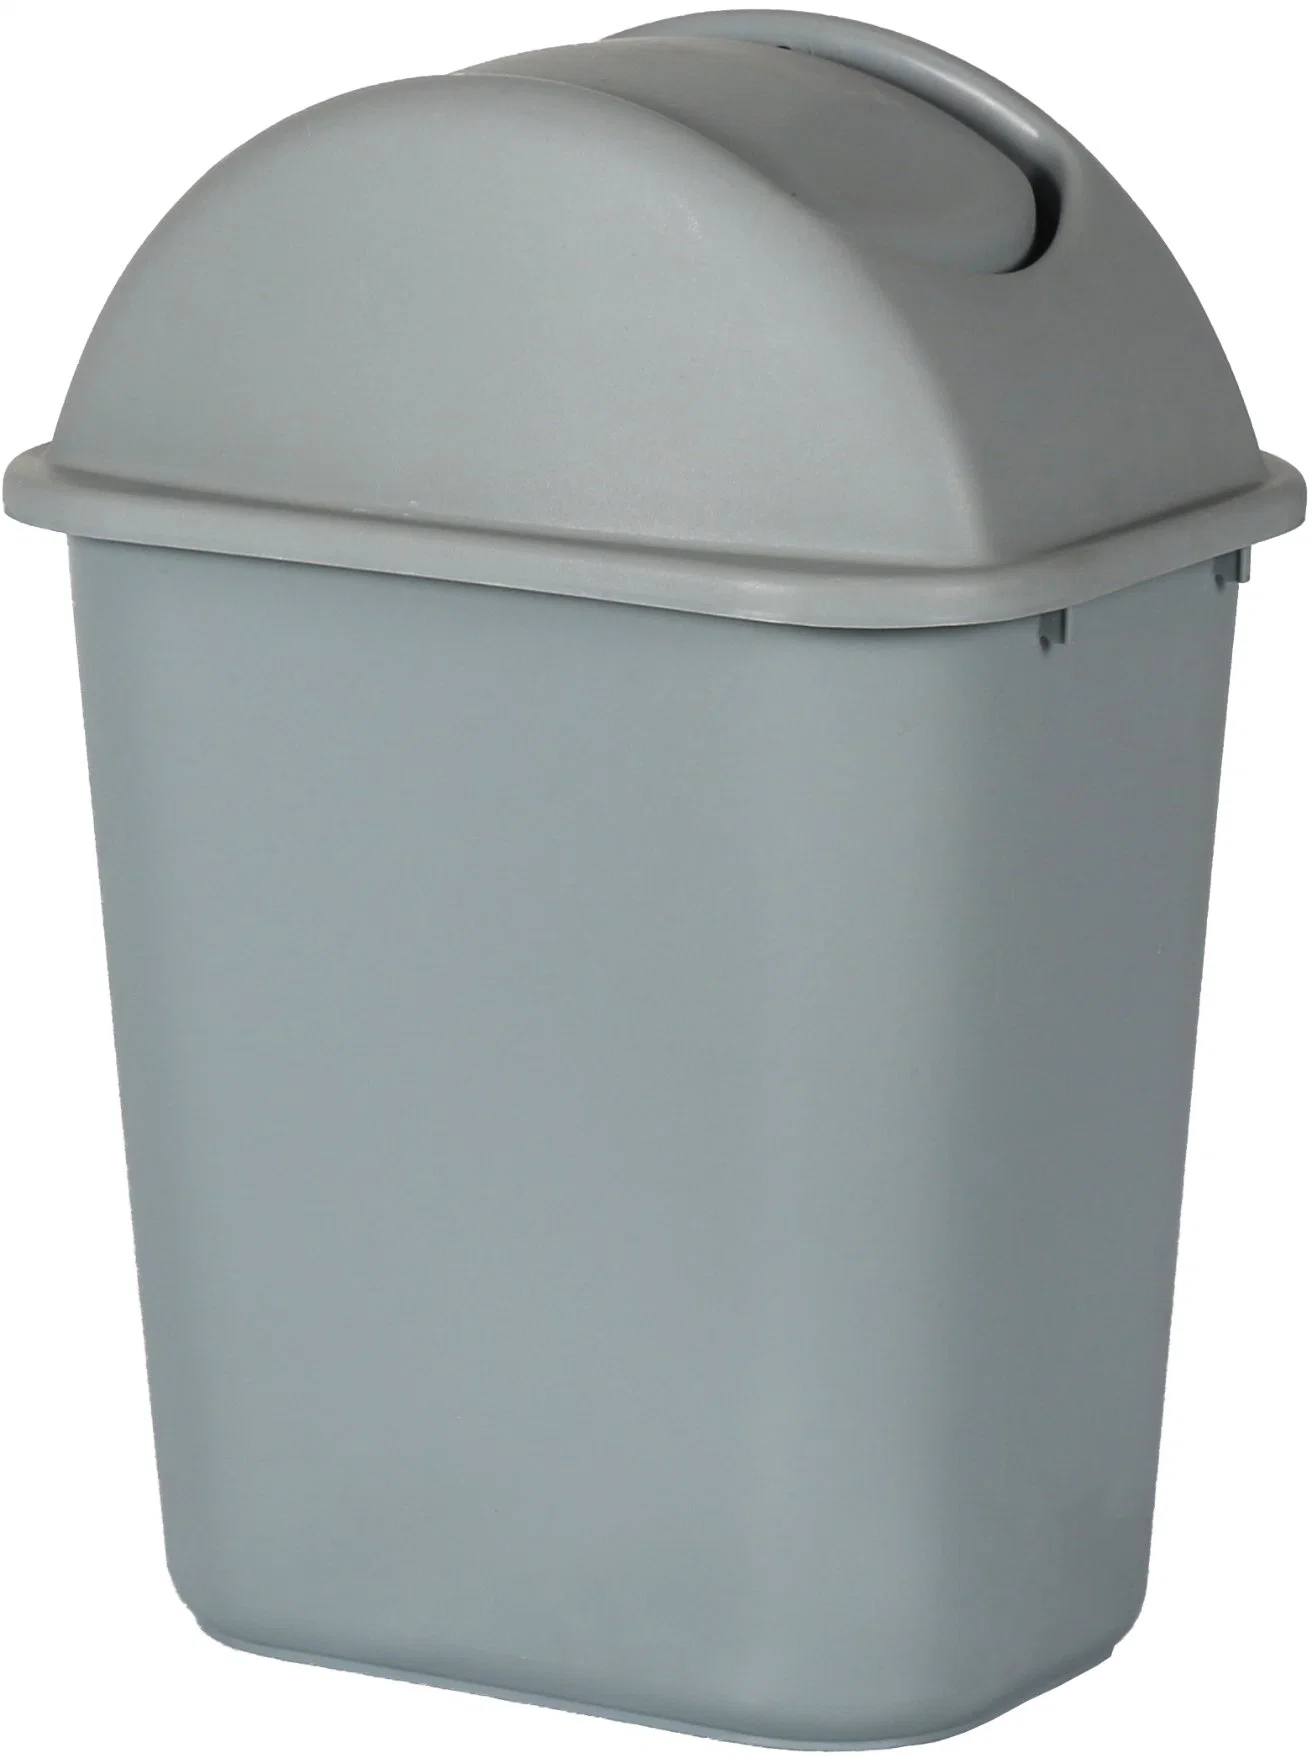 23liter / 42liter Square Plastic Dustbin with Cover for Office